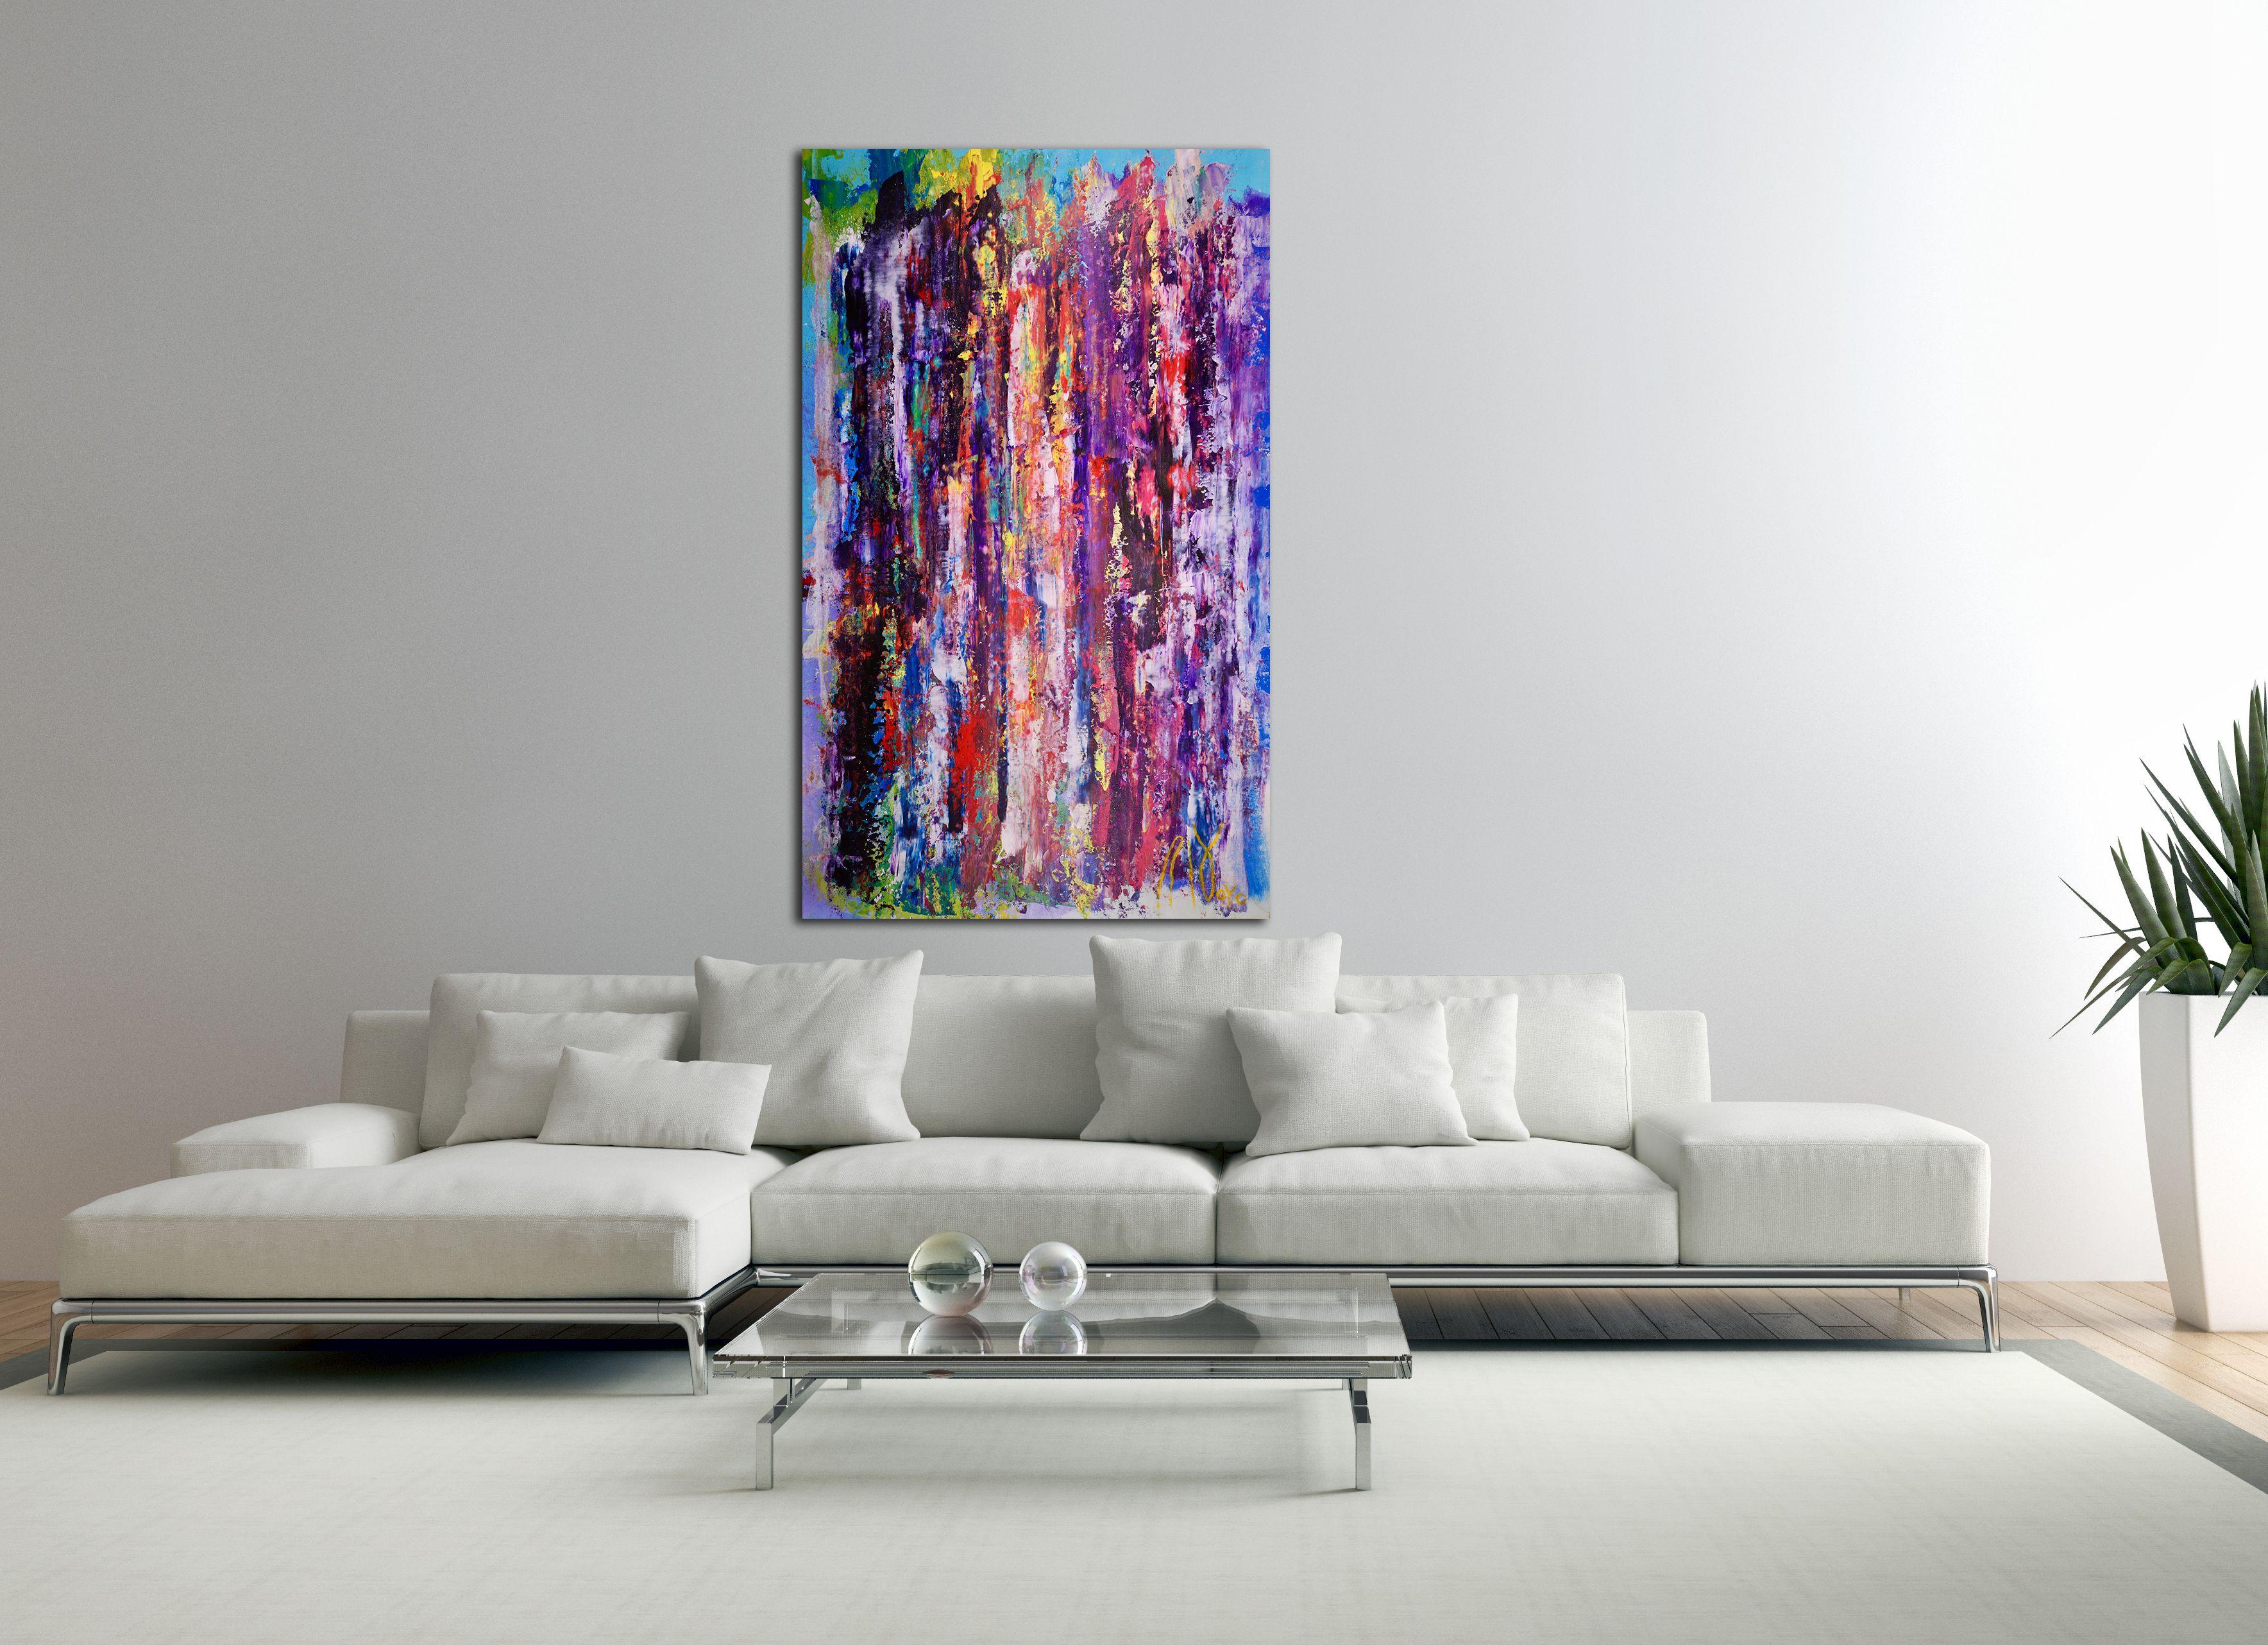 - BOLD STATEMENT PIECE   - SIGNED CERTIFICATE OF AUTHENTICITY  - SIGNED CANVAS    Description:  Embracing all the colors I love, predominately purple and blue. An array of textures over gesso layered canvas using fluid translucent acrylics and